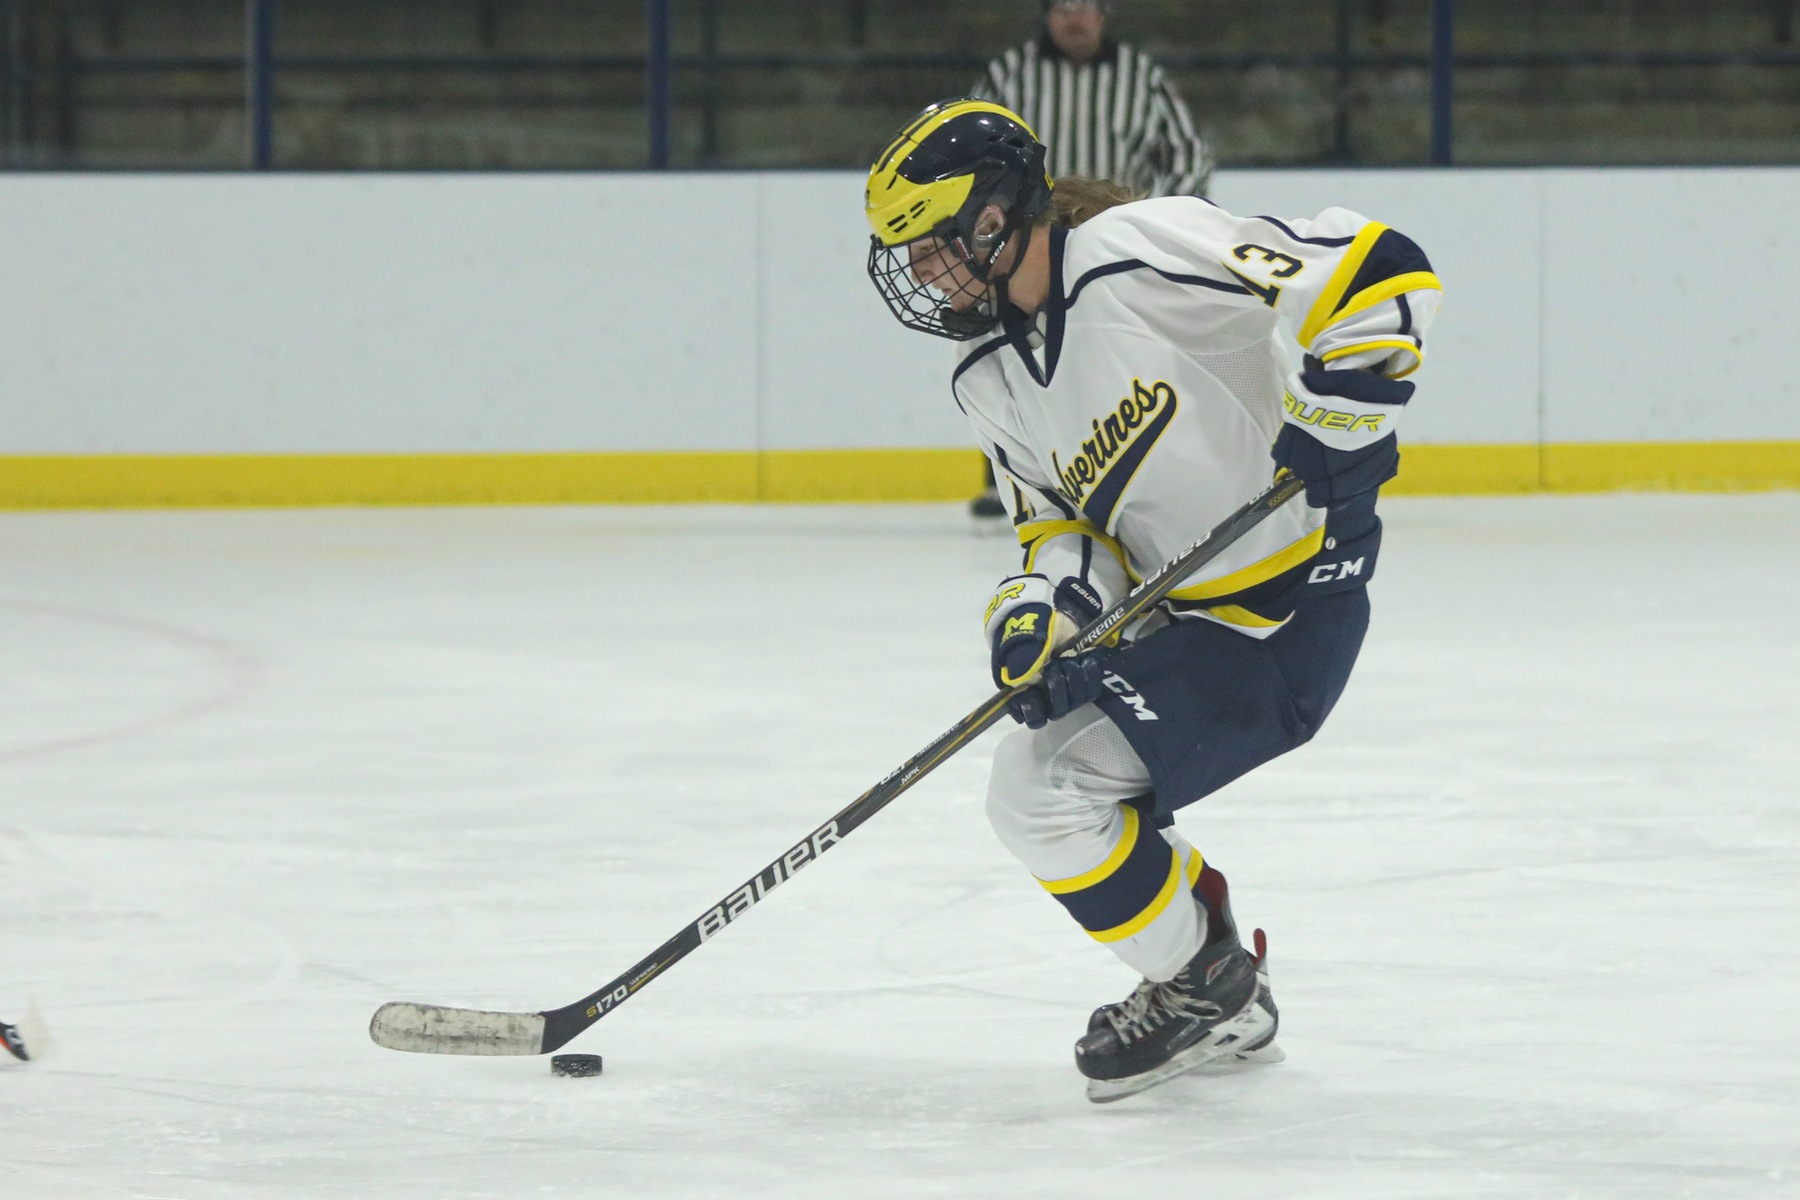 Wolverines earn two big road wins over the weekend